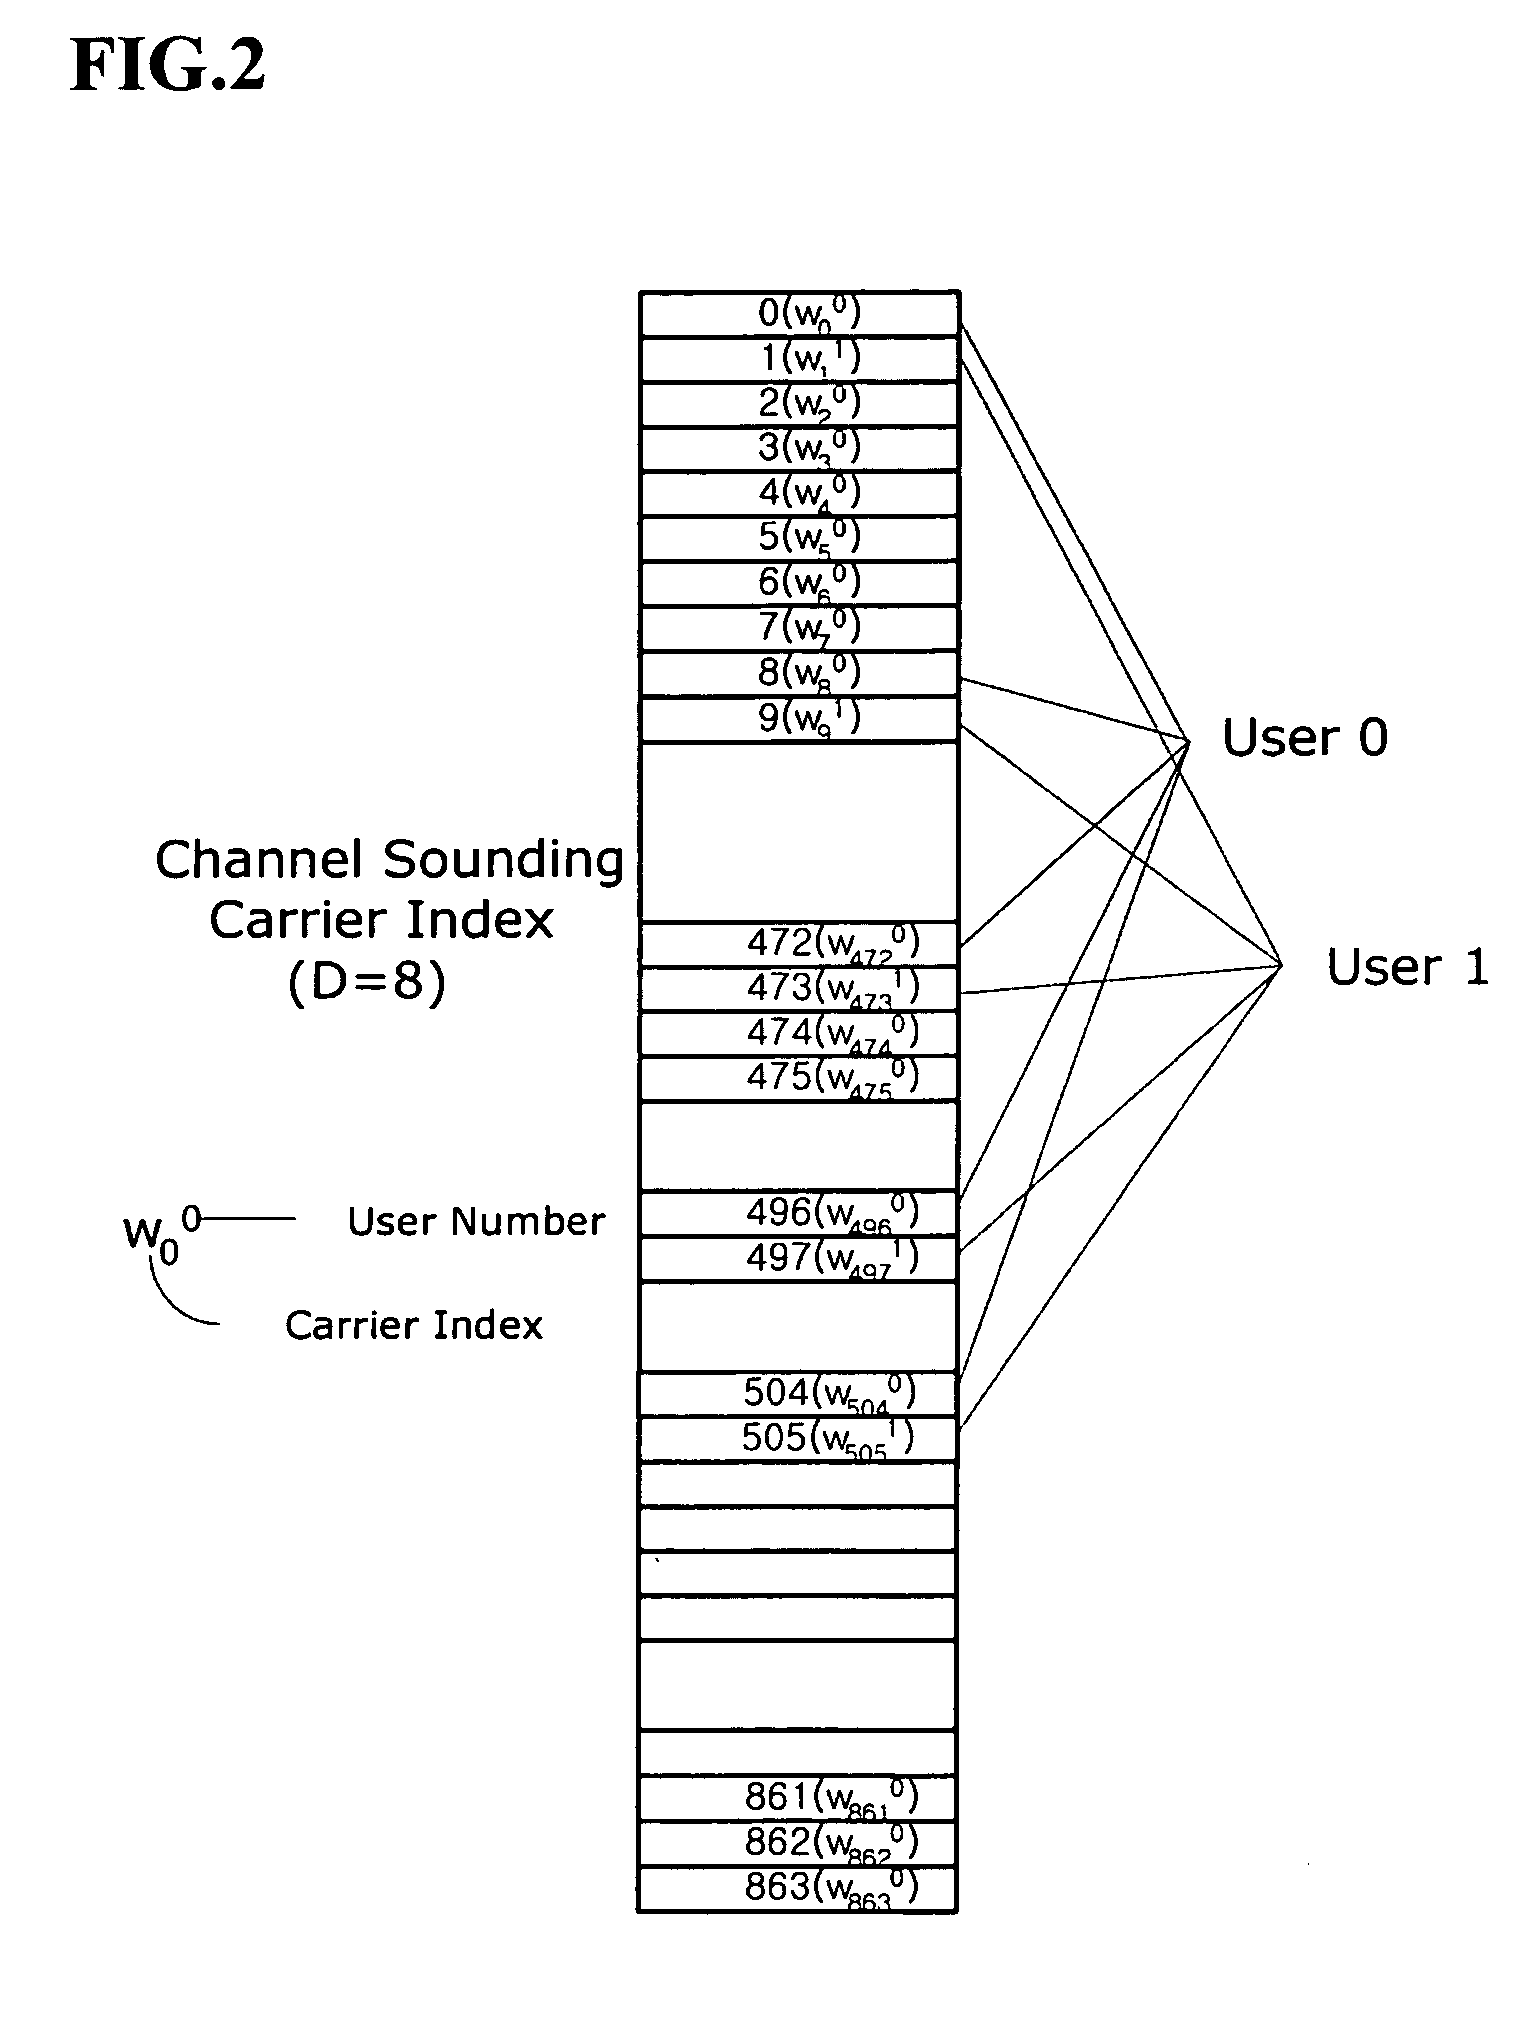 Downlink beamforming apparatus in OFDMA system and transmission apparatus including the same